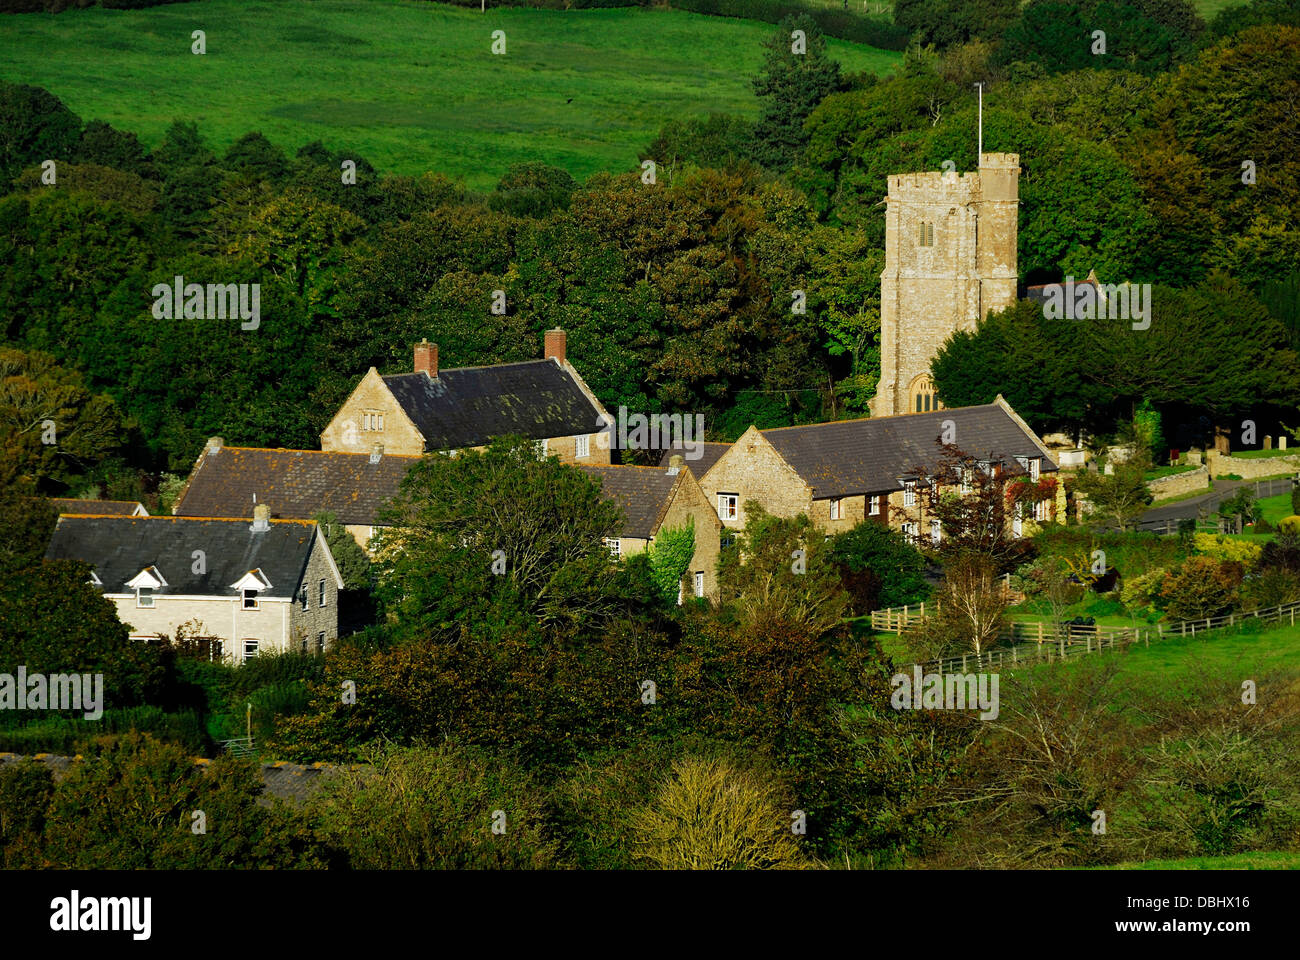 A view of the village of Askerswell Dorset UK Stock Photo